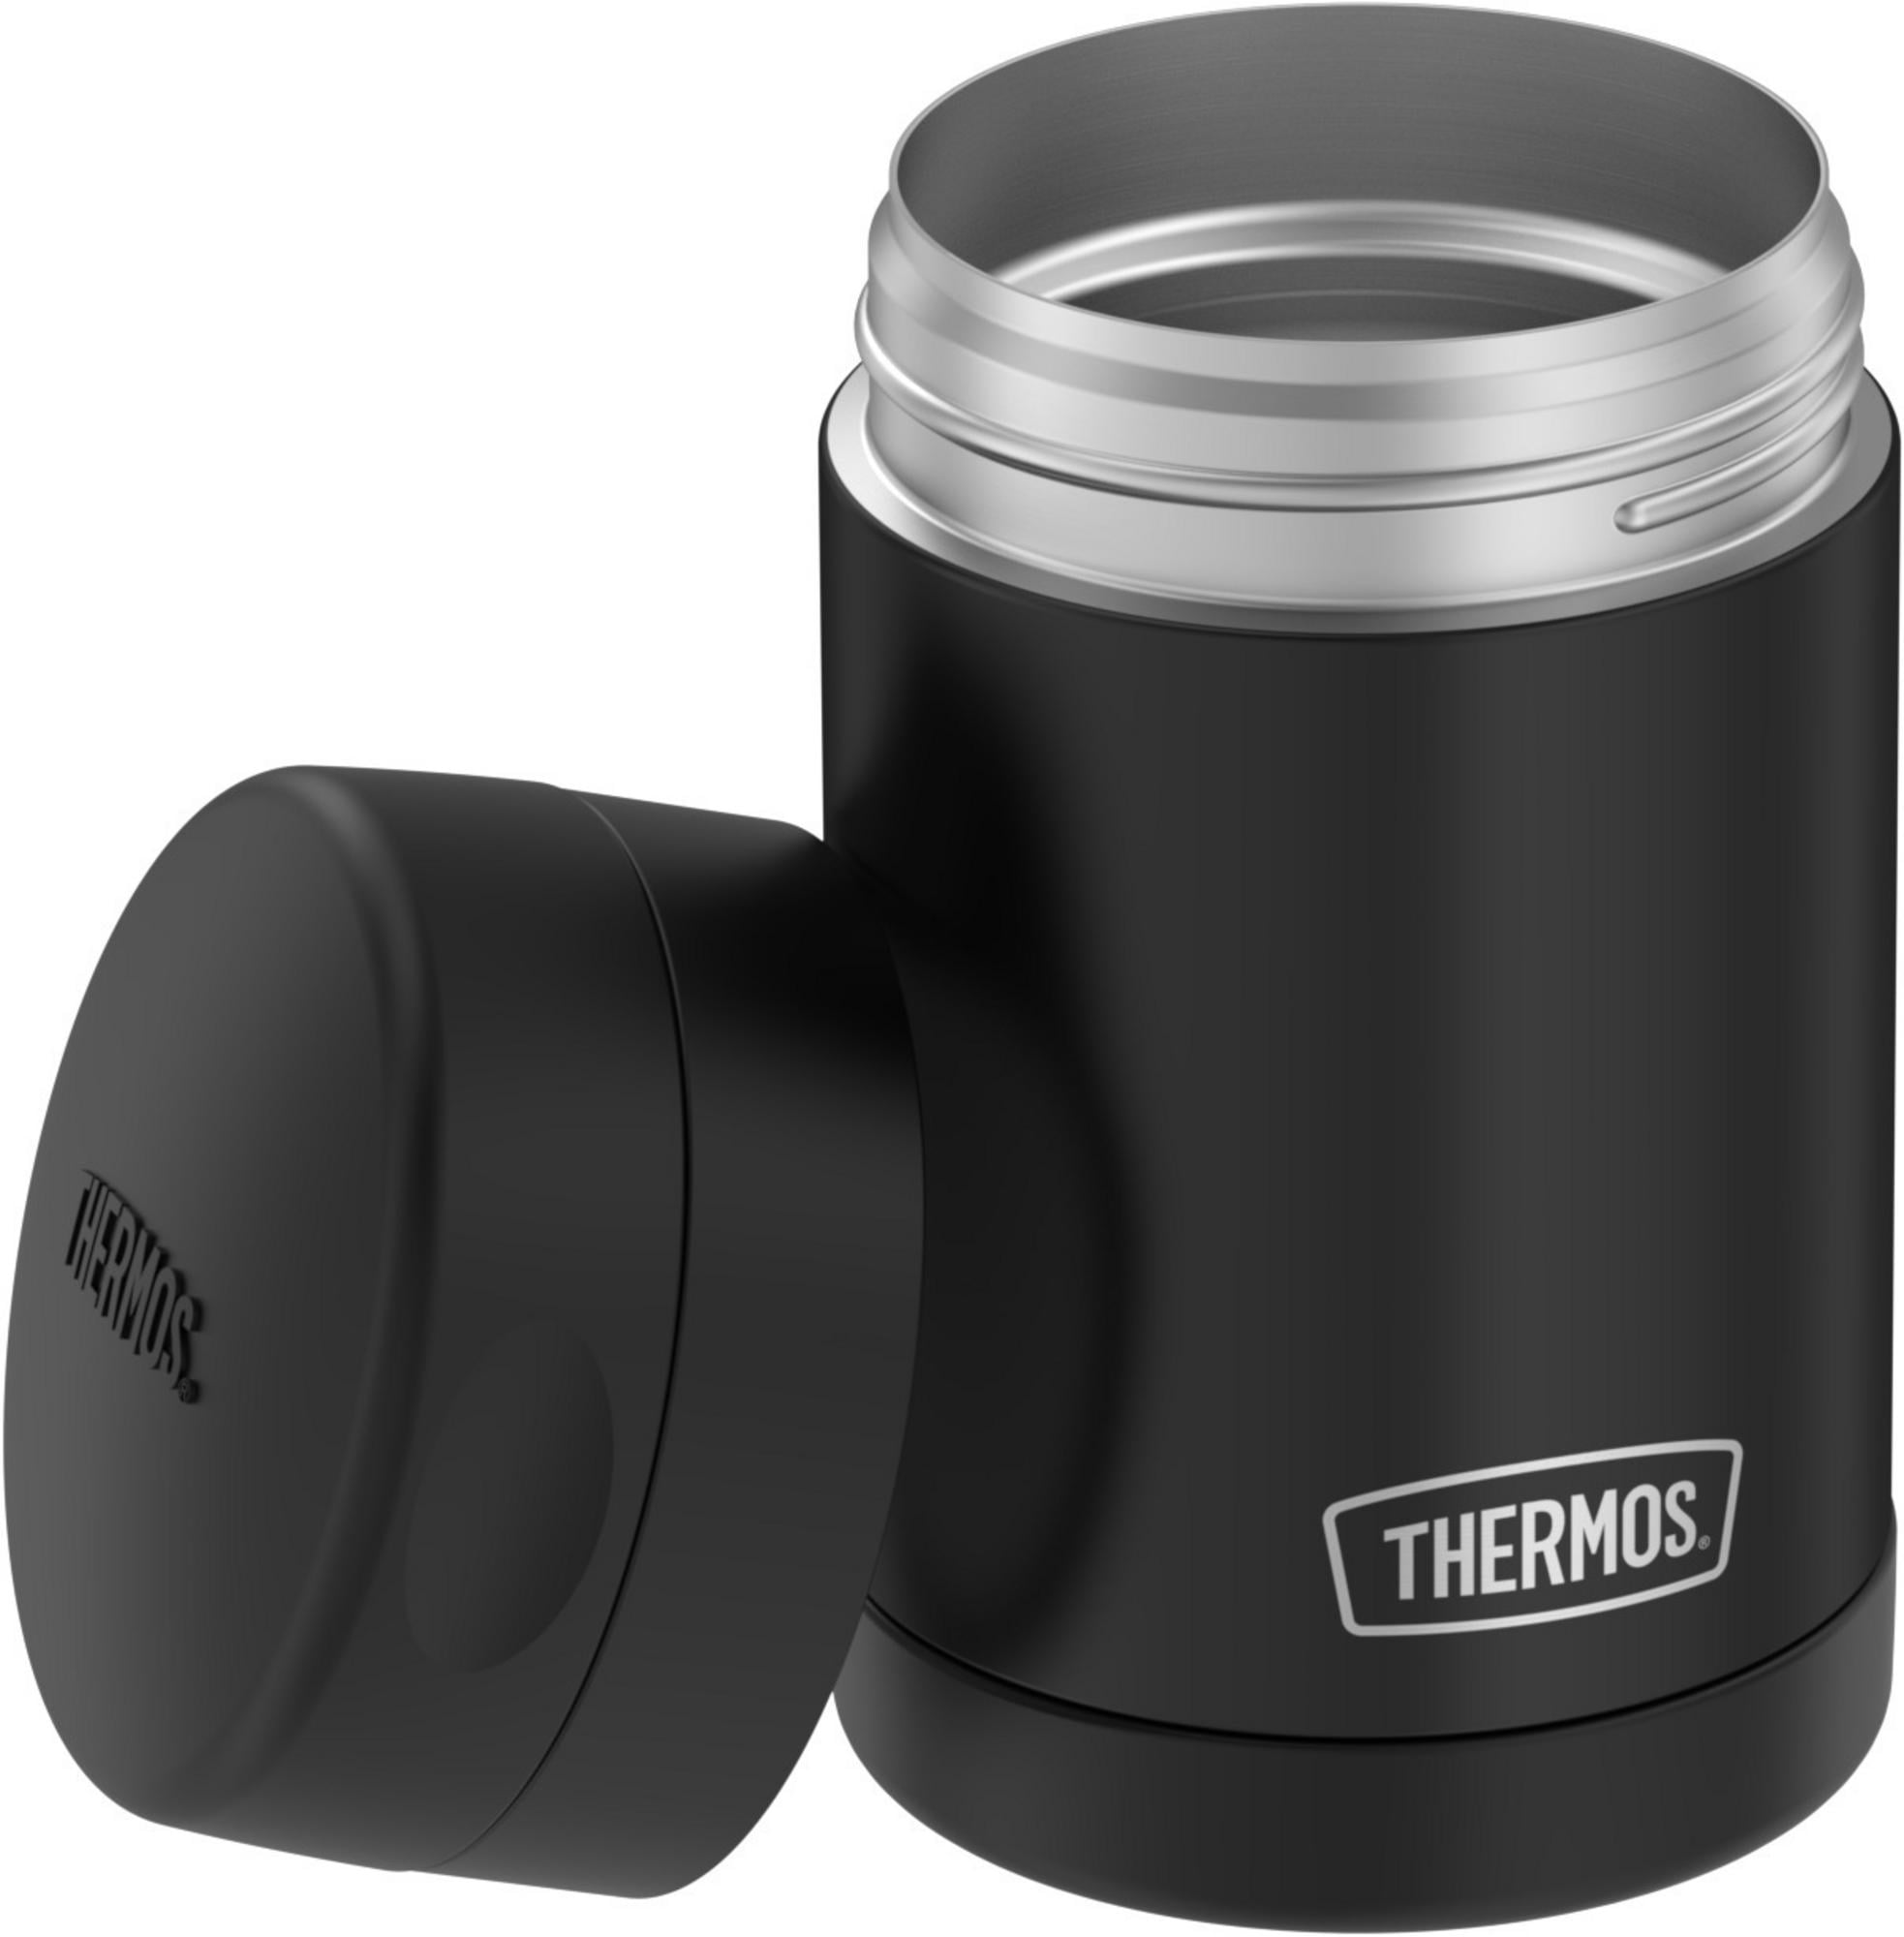 Thermos 16oz Insulated Food Jar with Folding Spoon, Matte Black